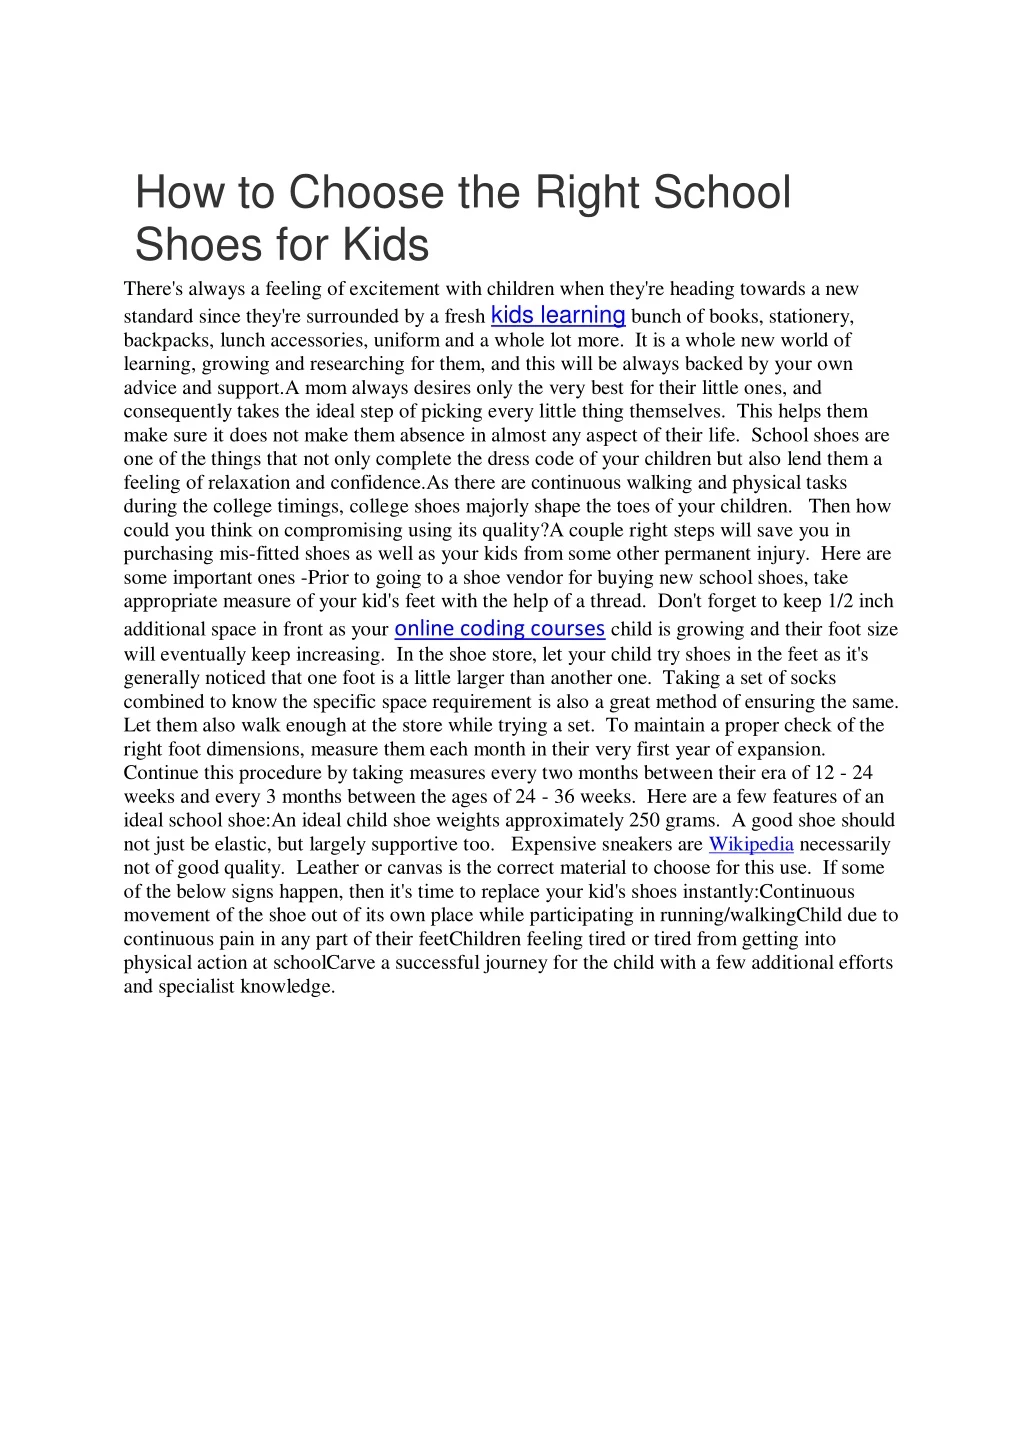 how to choose the right school shoes for kids